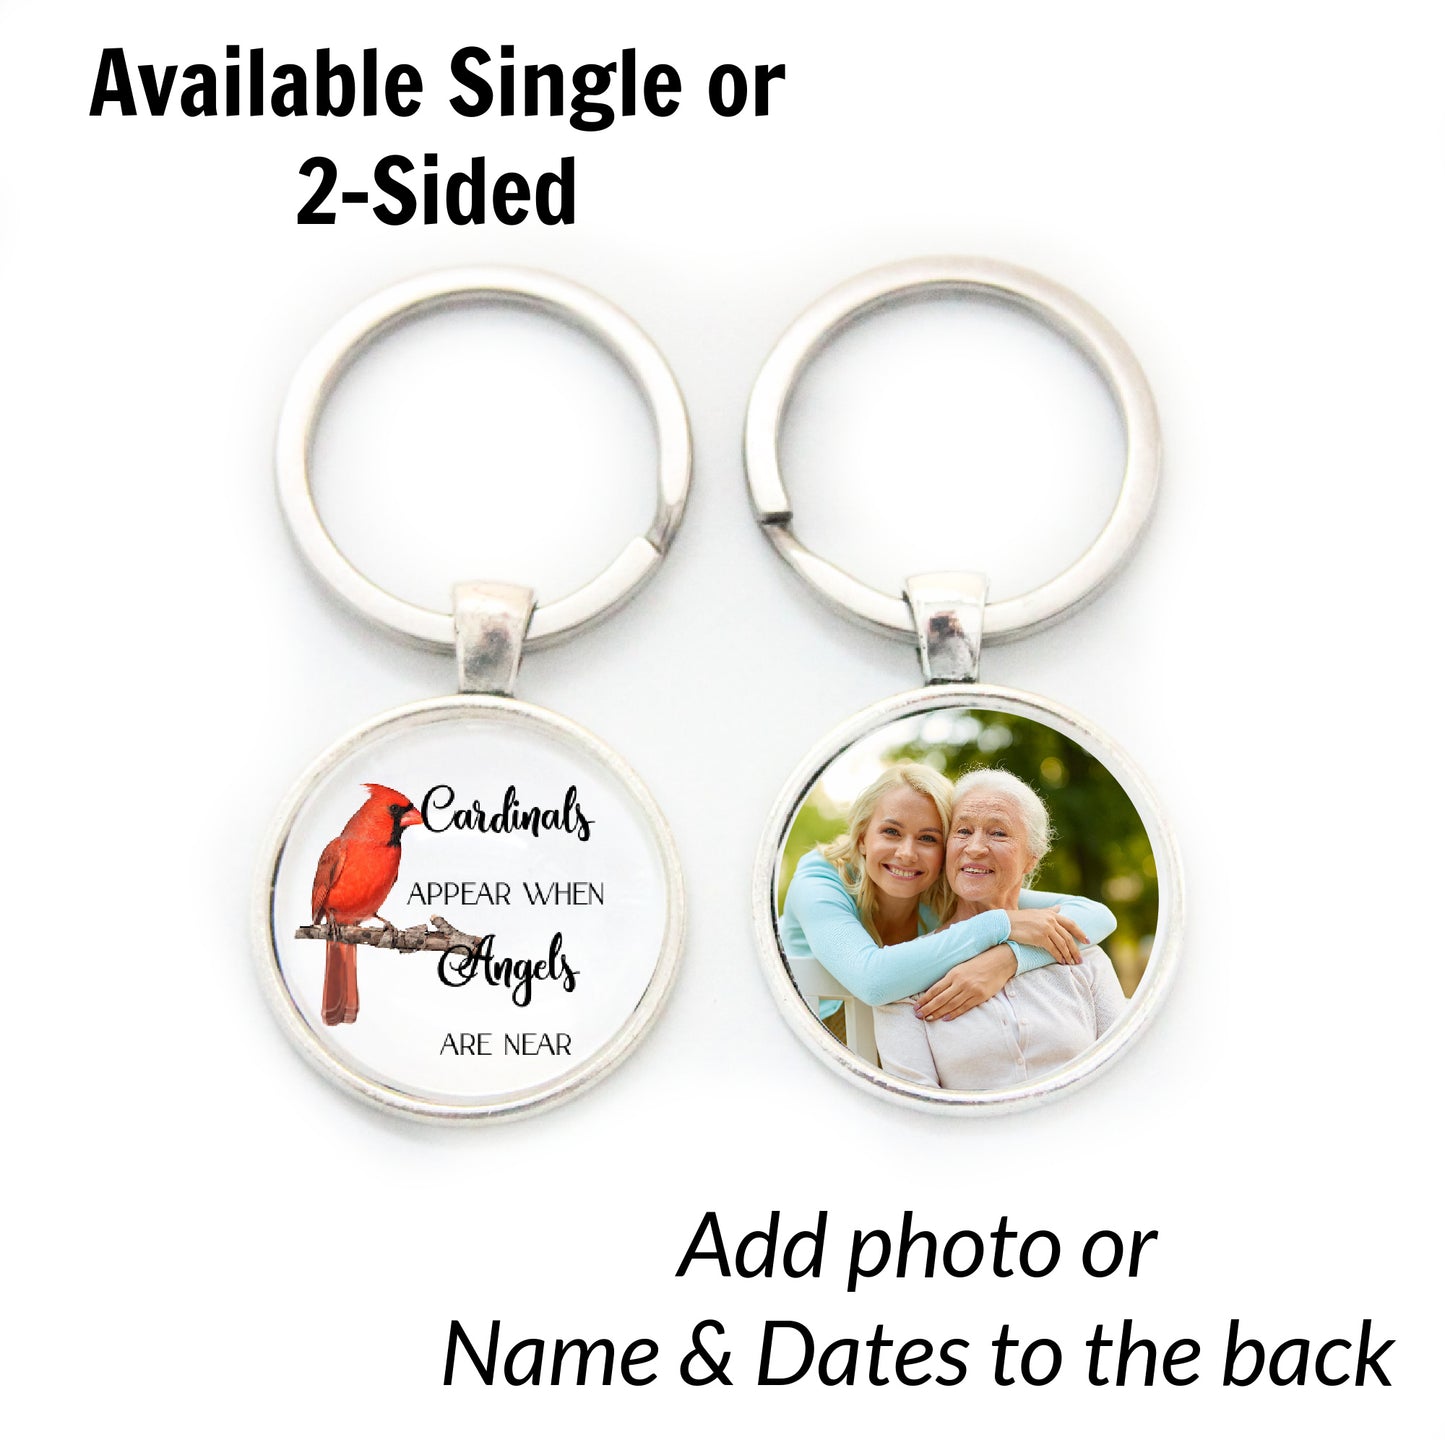 Cardinals Appear Rearview Mirror Hanging Charm